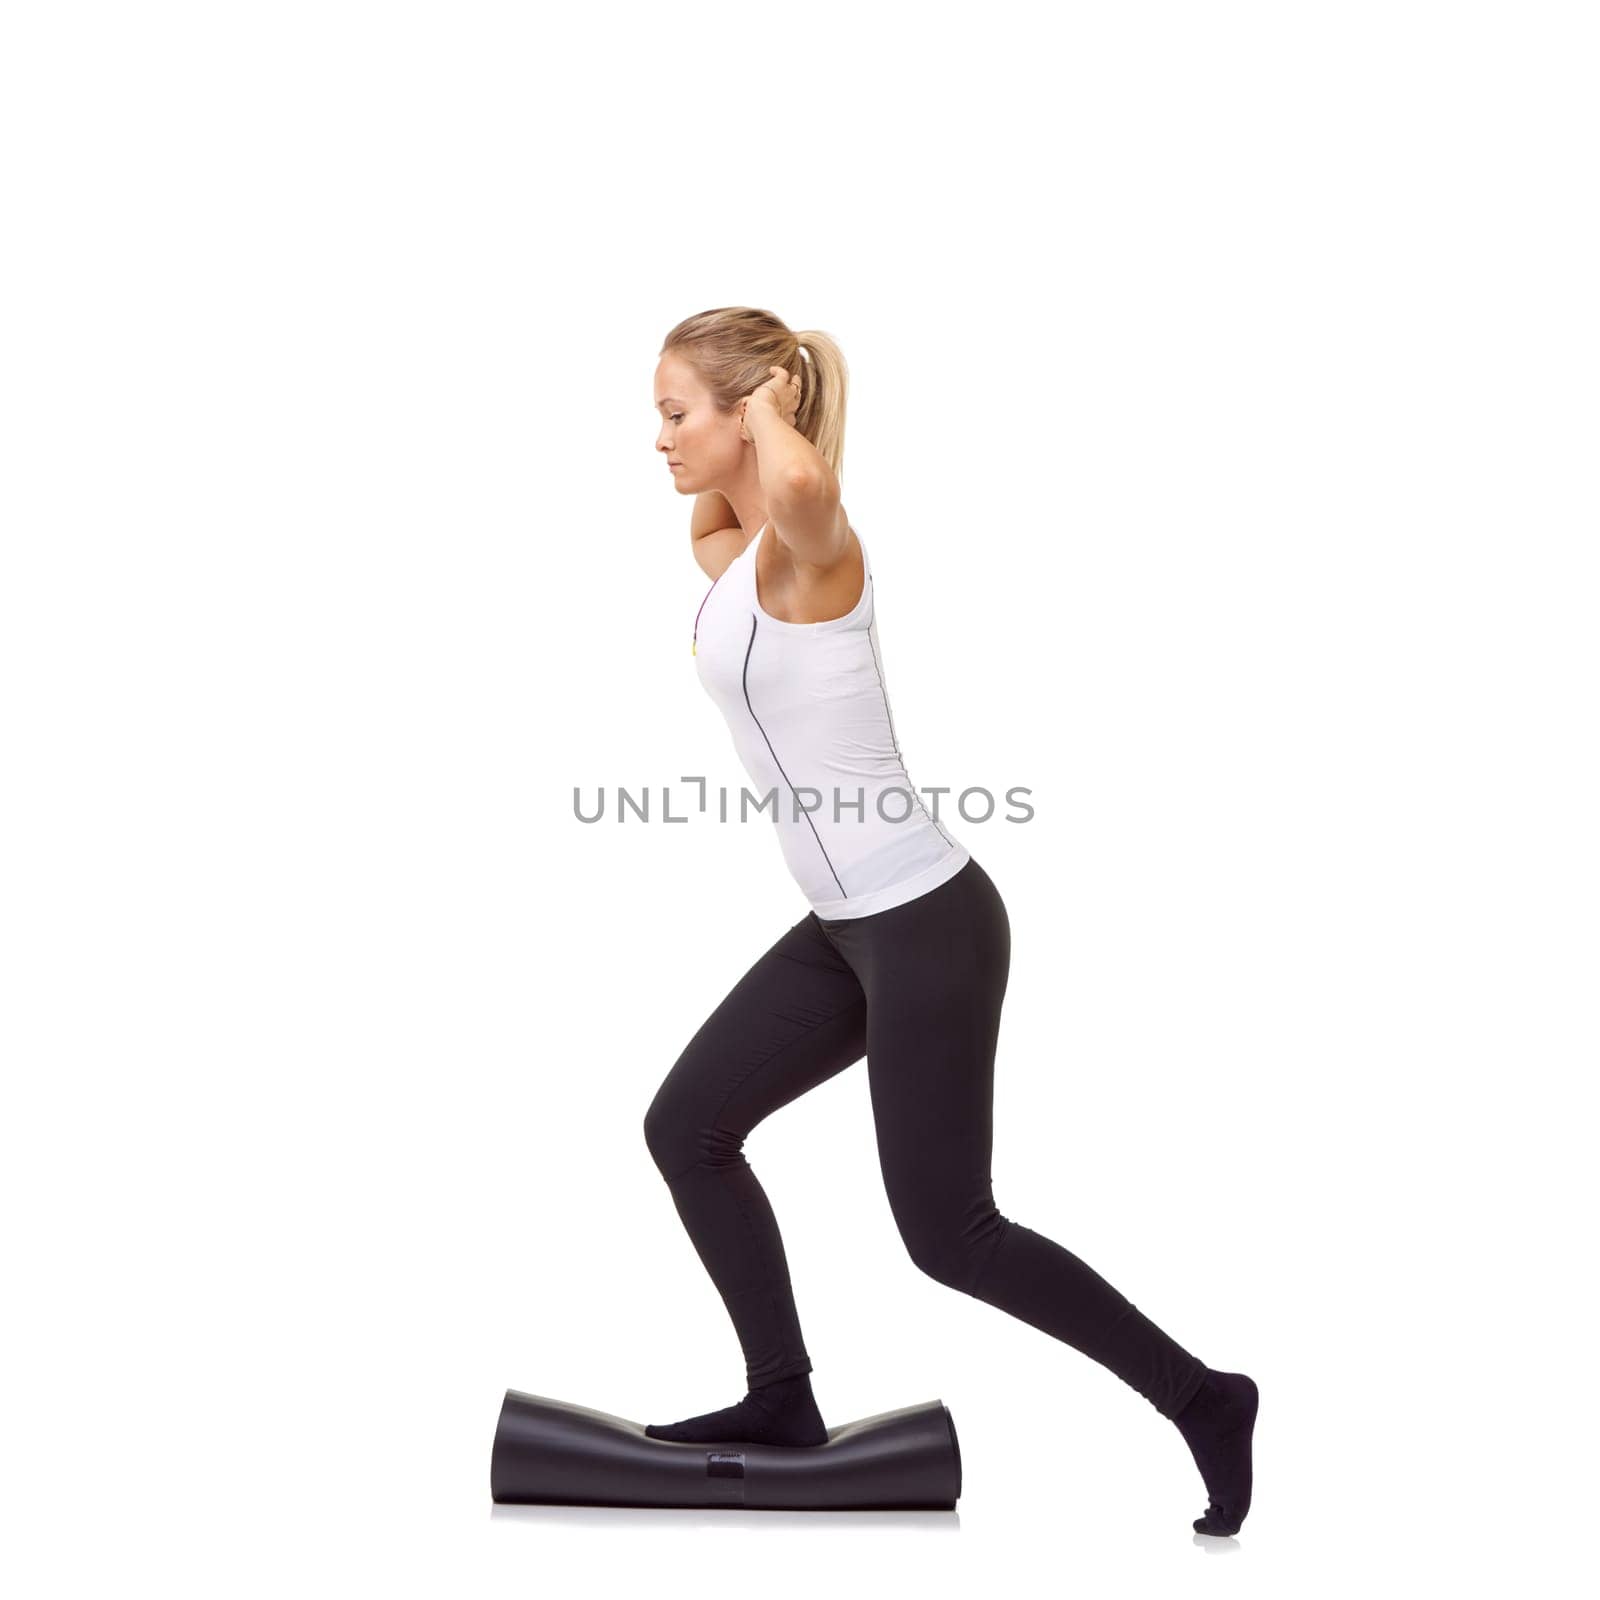 Woman, exercise and mat in studio for workout, pilates or fitness for healthy body, wellness or balance. Person, face and yoga in sportswear for physical activity on mock up space or white background.